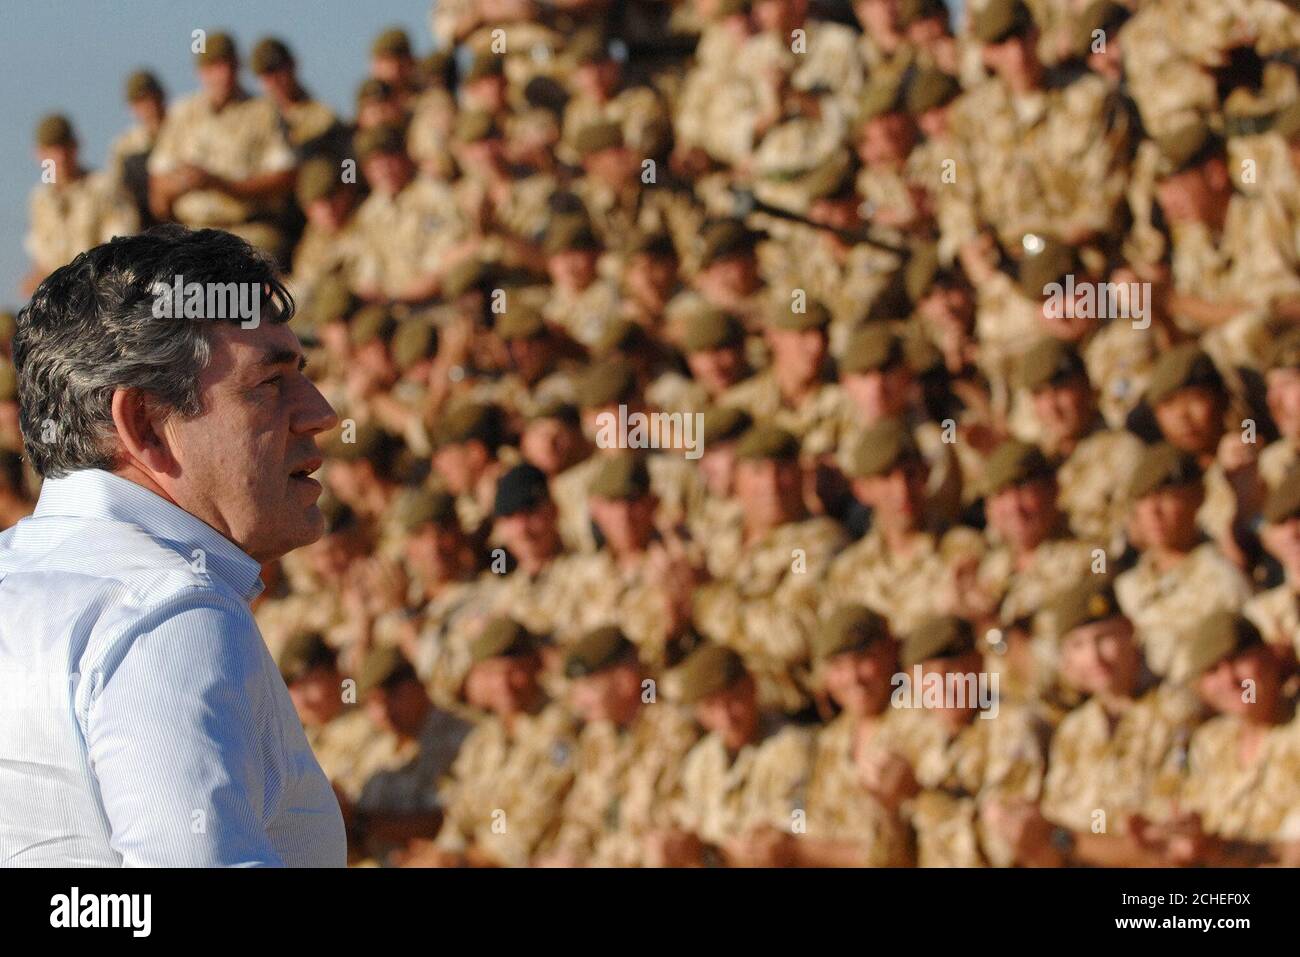 British Chancellor of the Exchequer Gordon Brown addresses troops from the First Battalion, The Princess of Wales's Royal Regiment (PWRR), at Basra Air Station in southern Iraq where he announced at least £100 million in new aid for reconstruction. Stock Photo